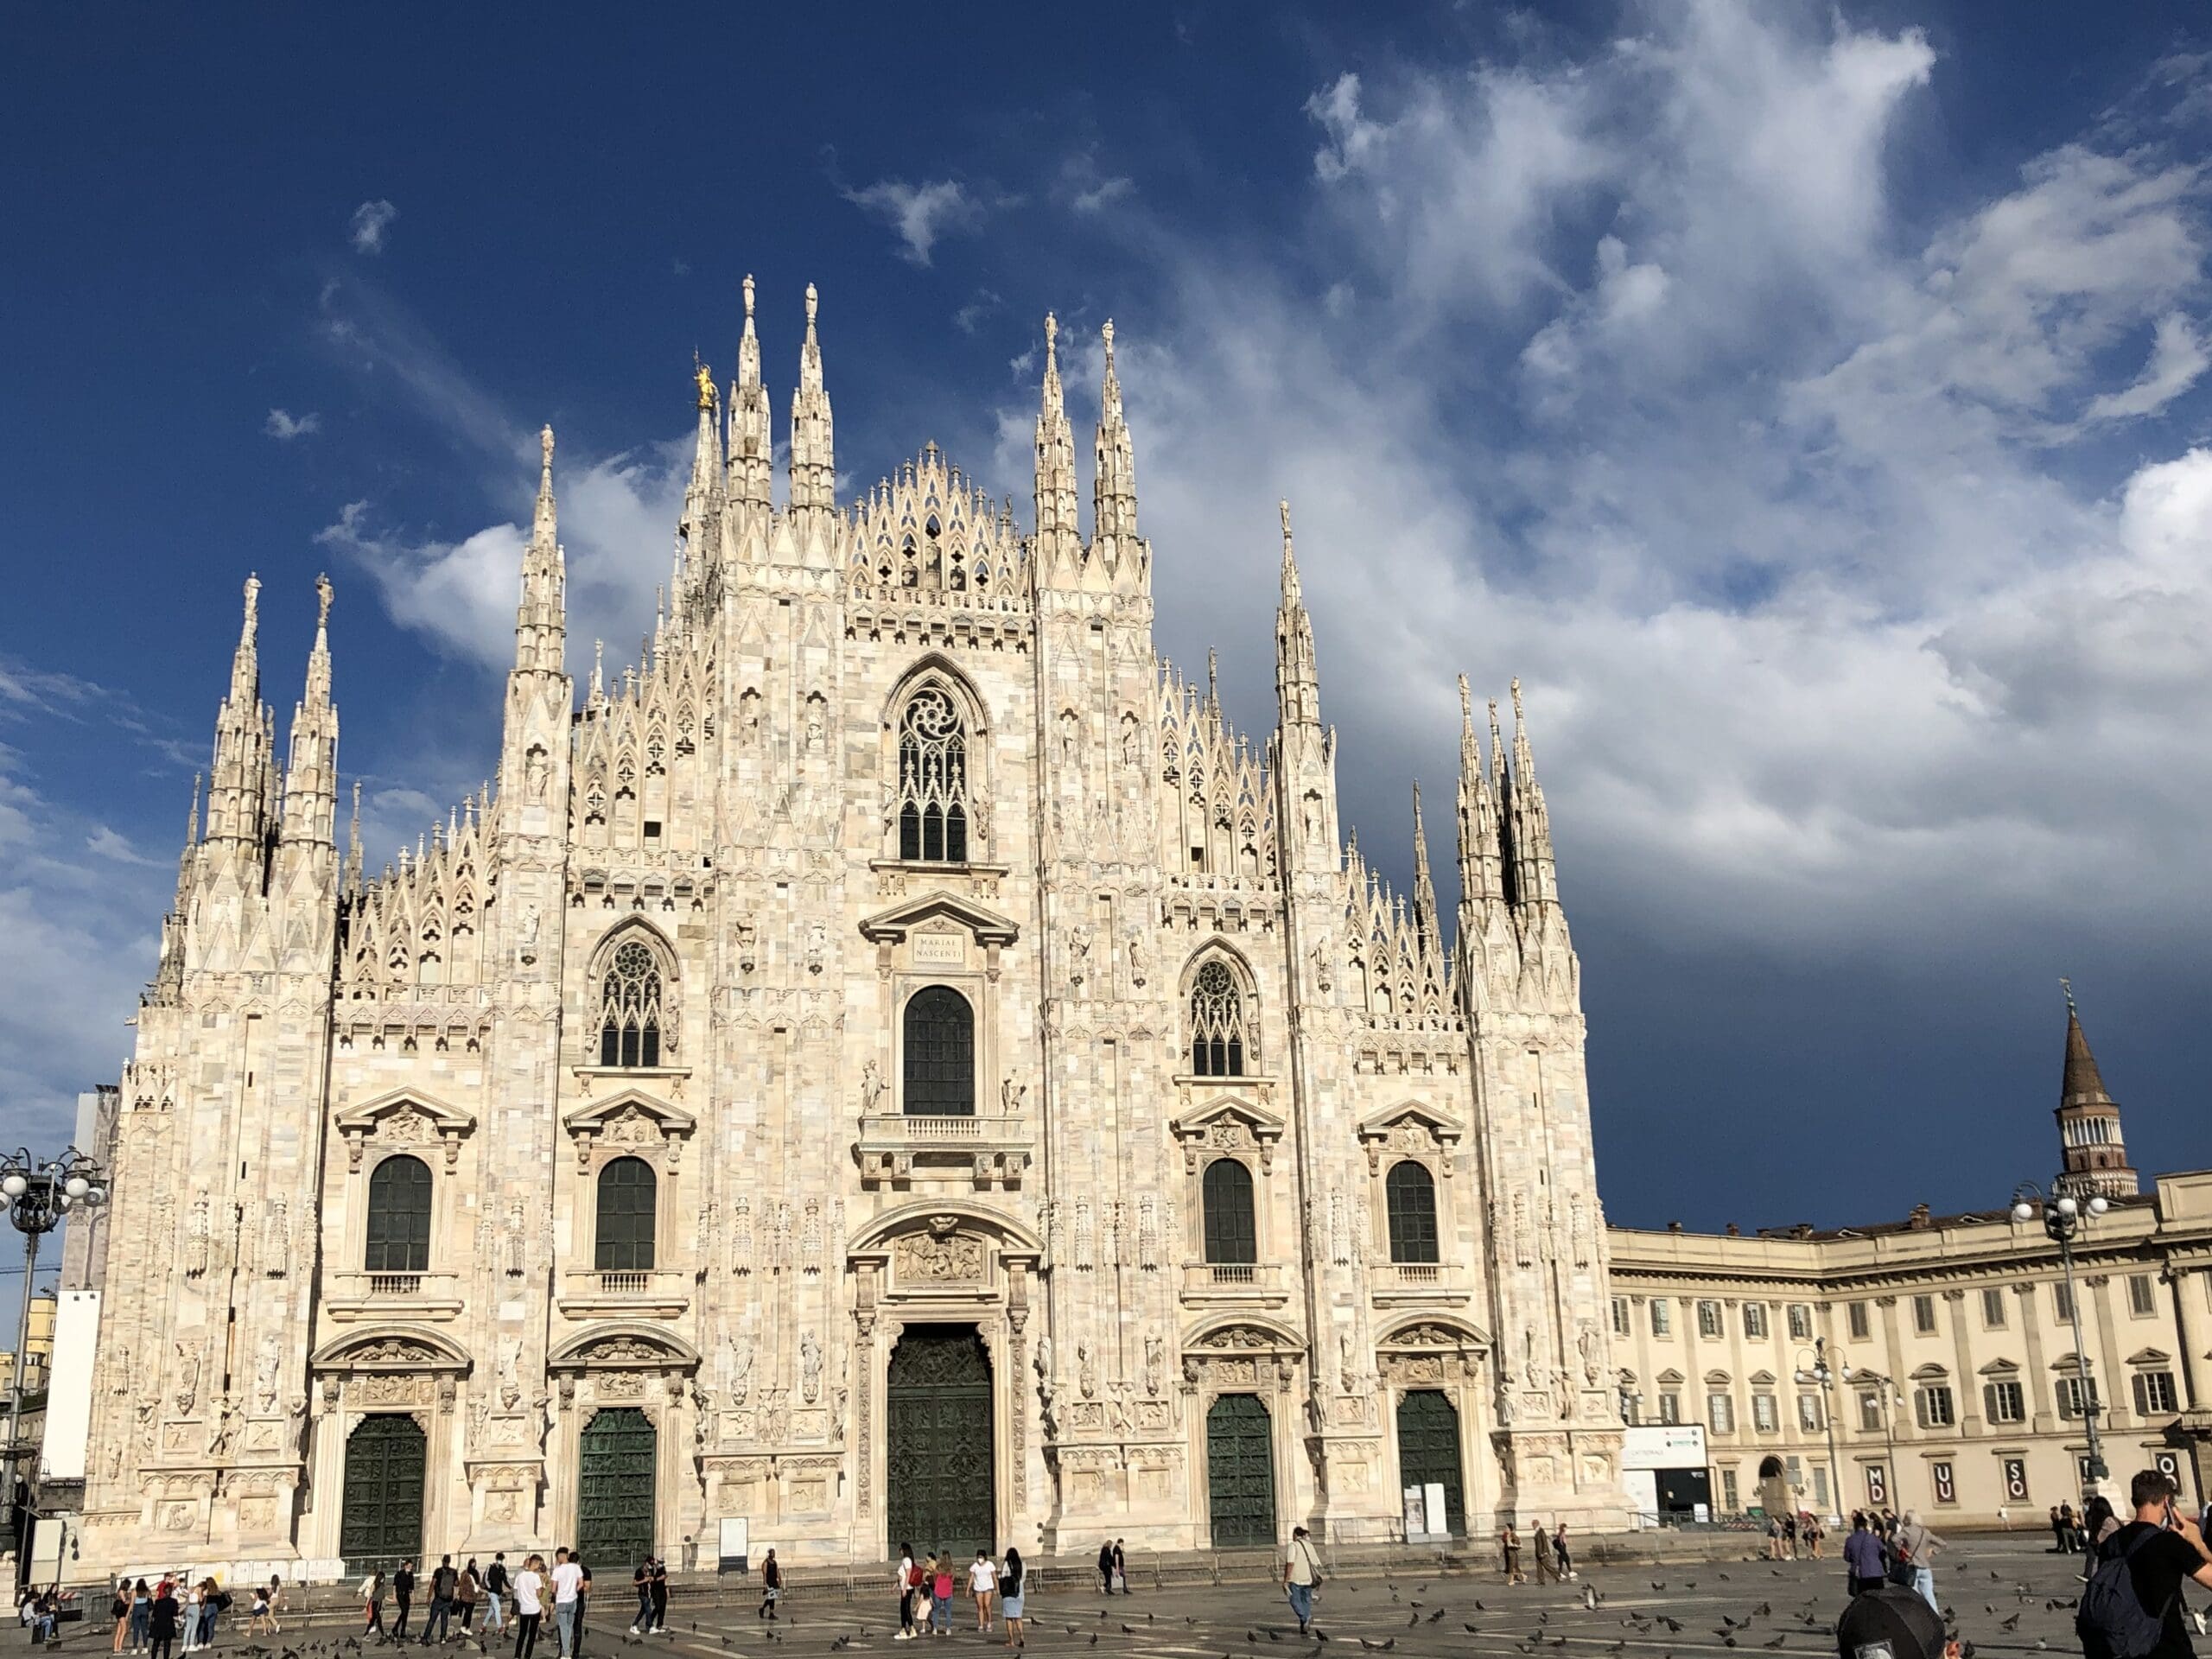 Updates about access to the Historical Complex of the Duomo of Milan